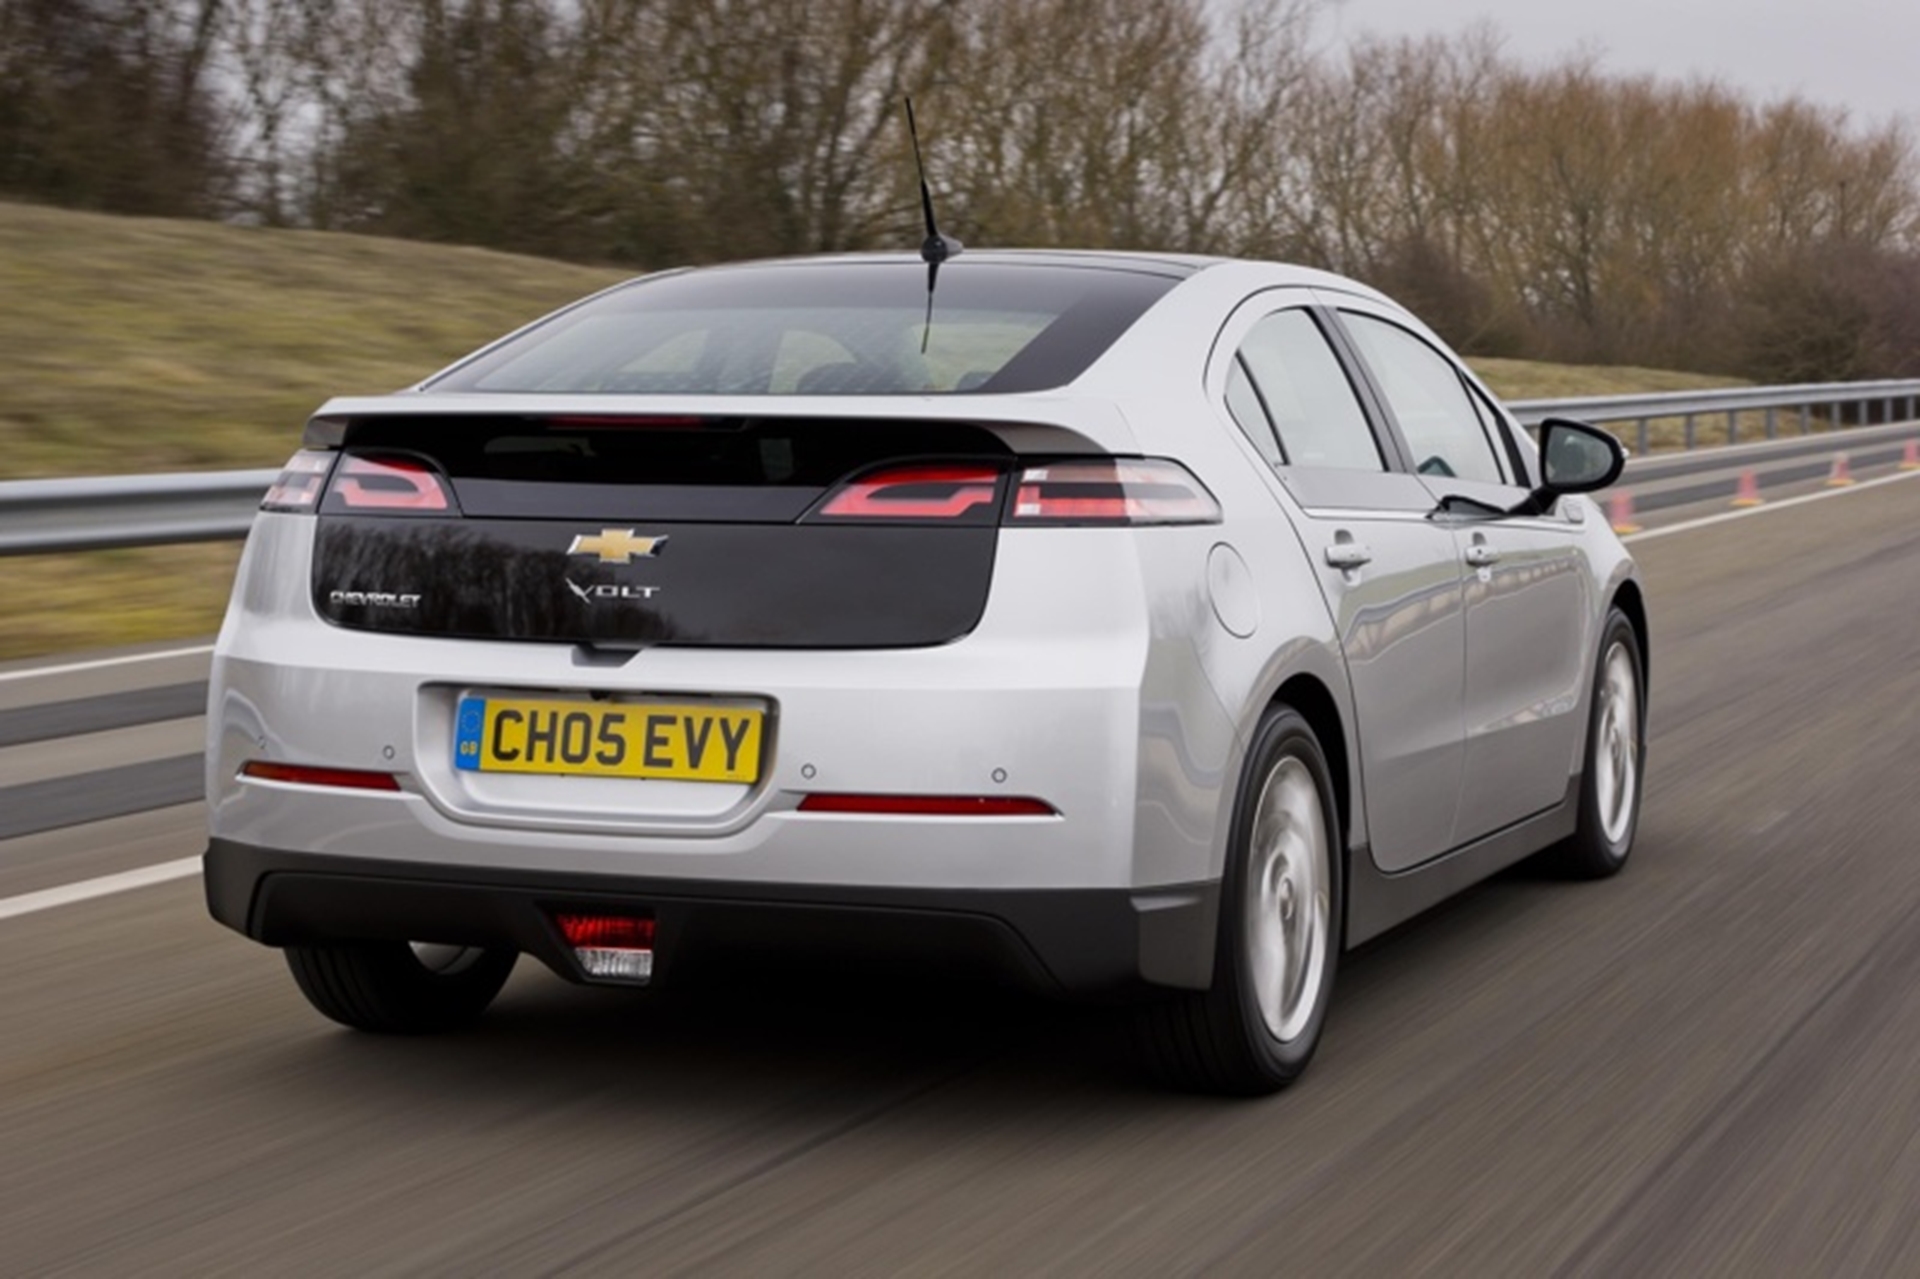 CHEVROLET VOLT USHERS IN A NEW ERA OF WORRY-FREE ELECTRIC DRIVING